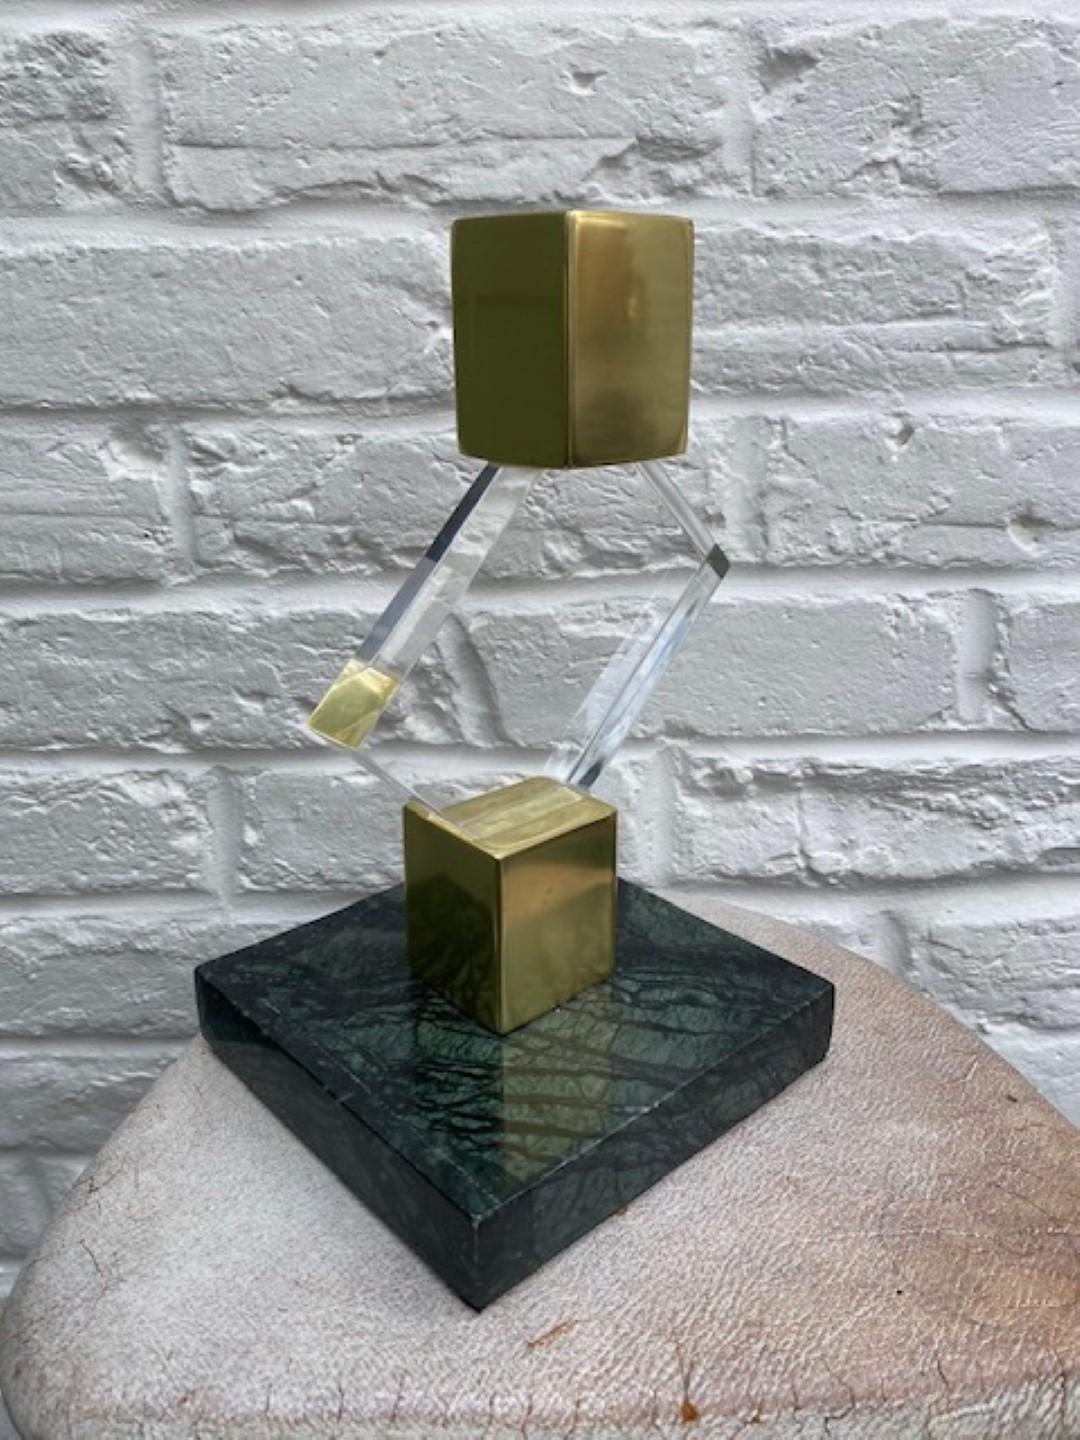 Mid-century brass and lucite sculpture on green marble base, French 1970s

Beautiful Mid-Century Modern brass and lucite sculpture. Rectangular lucite block, appears to be pivotting on its corners between two brass cubes. On a green marble base.